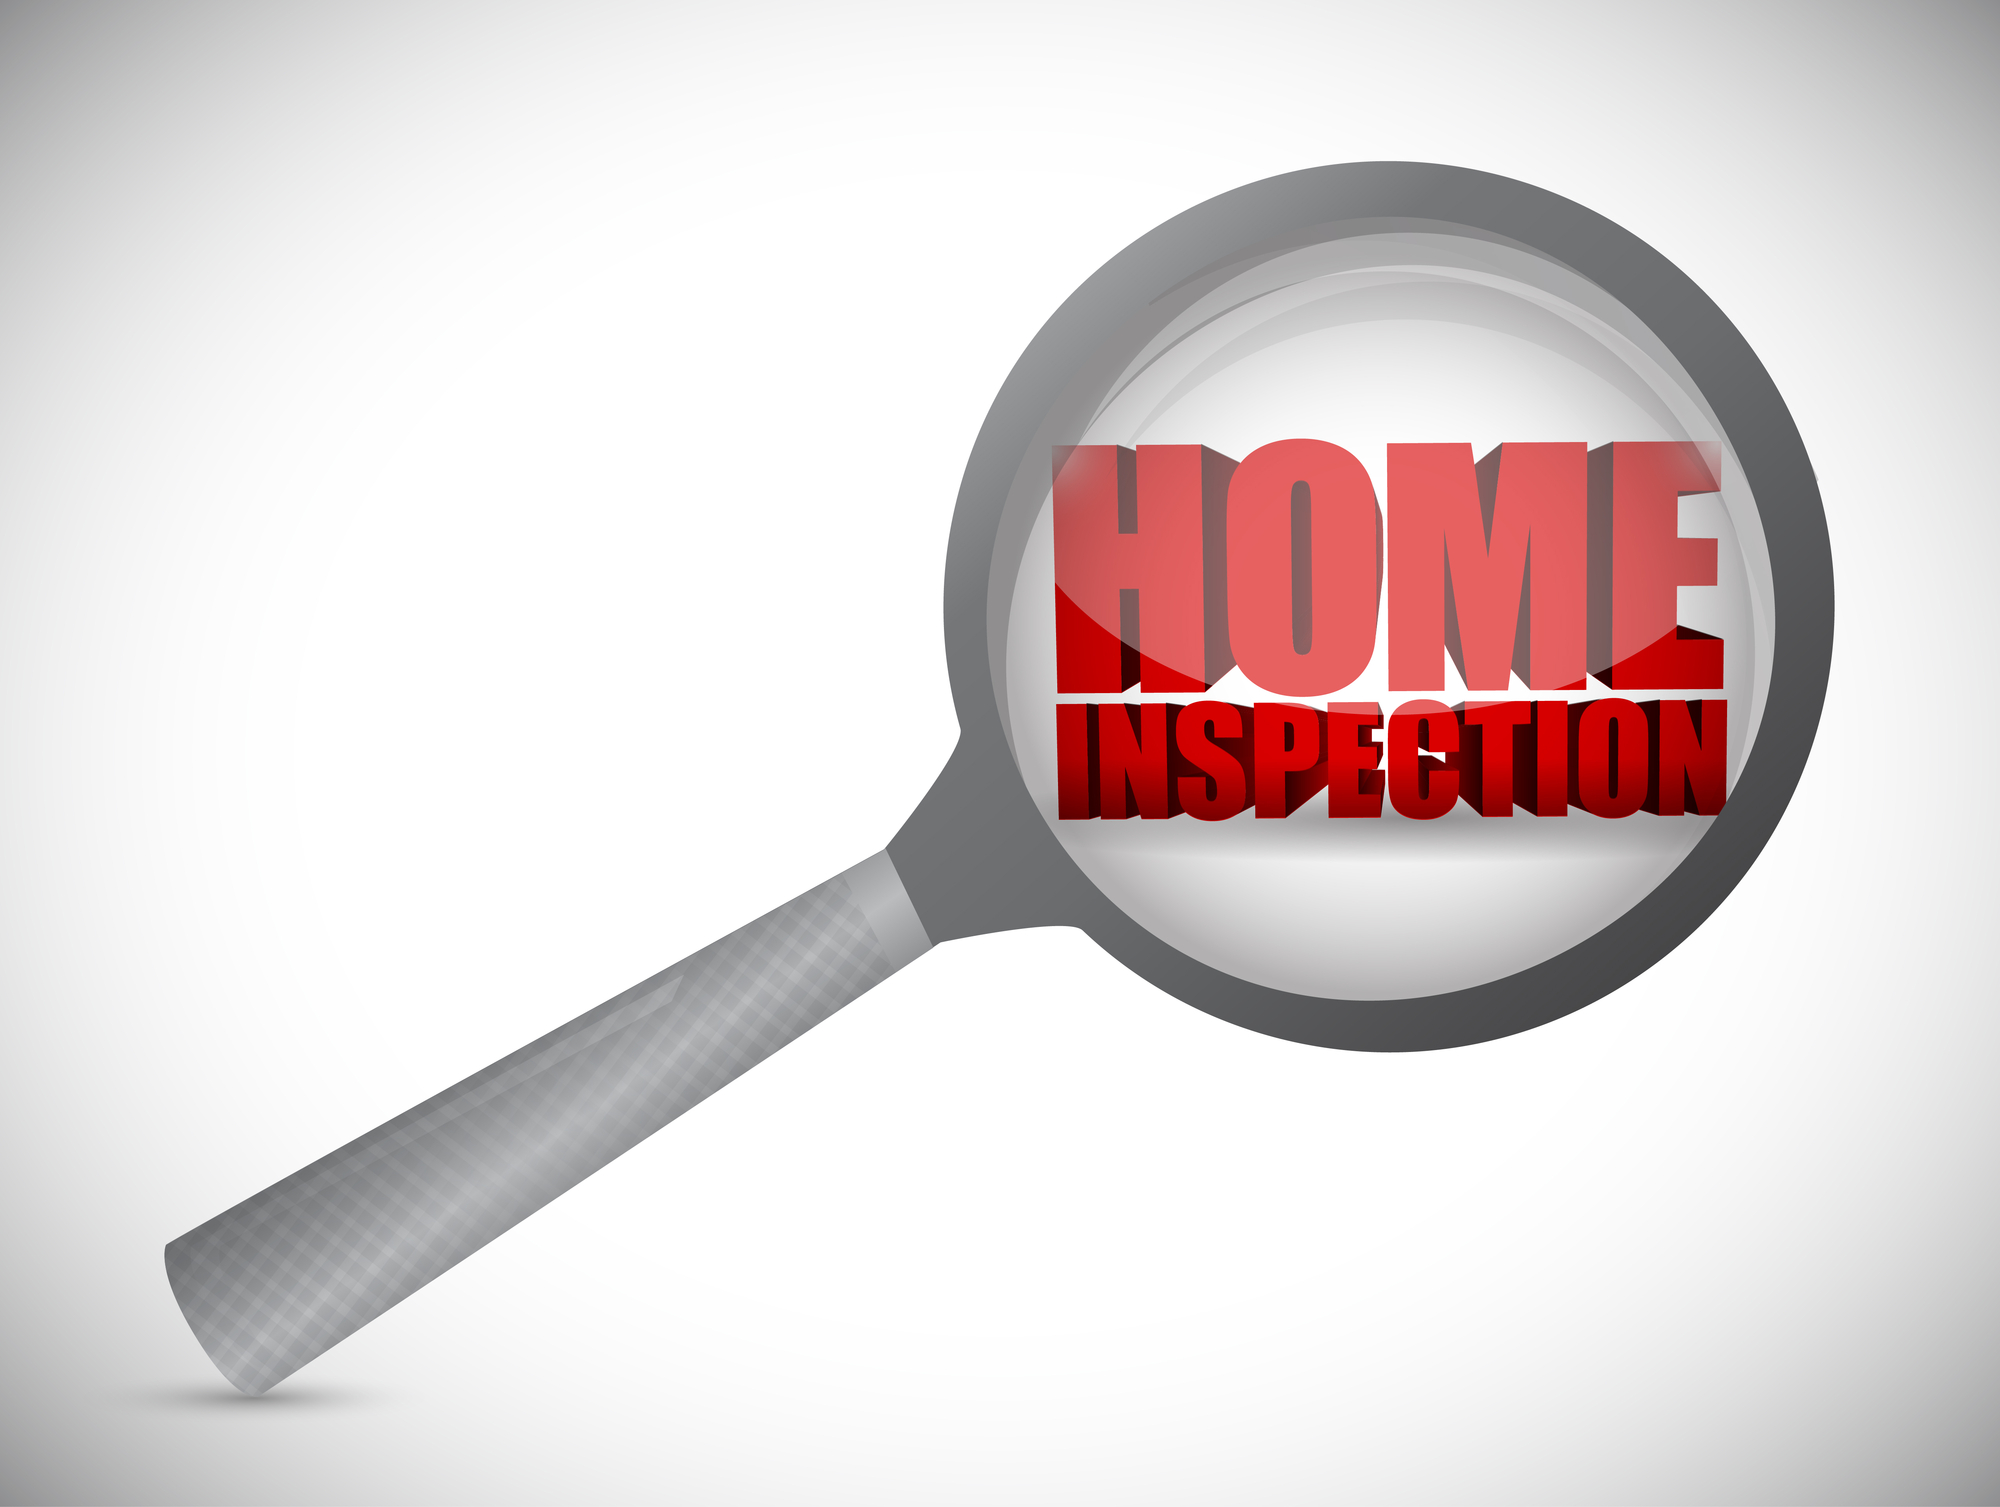 new home safety inspection in philly